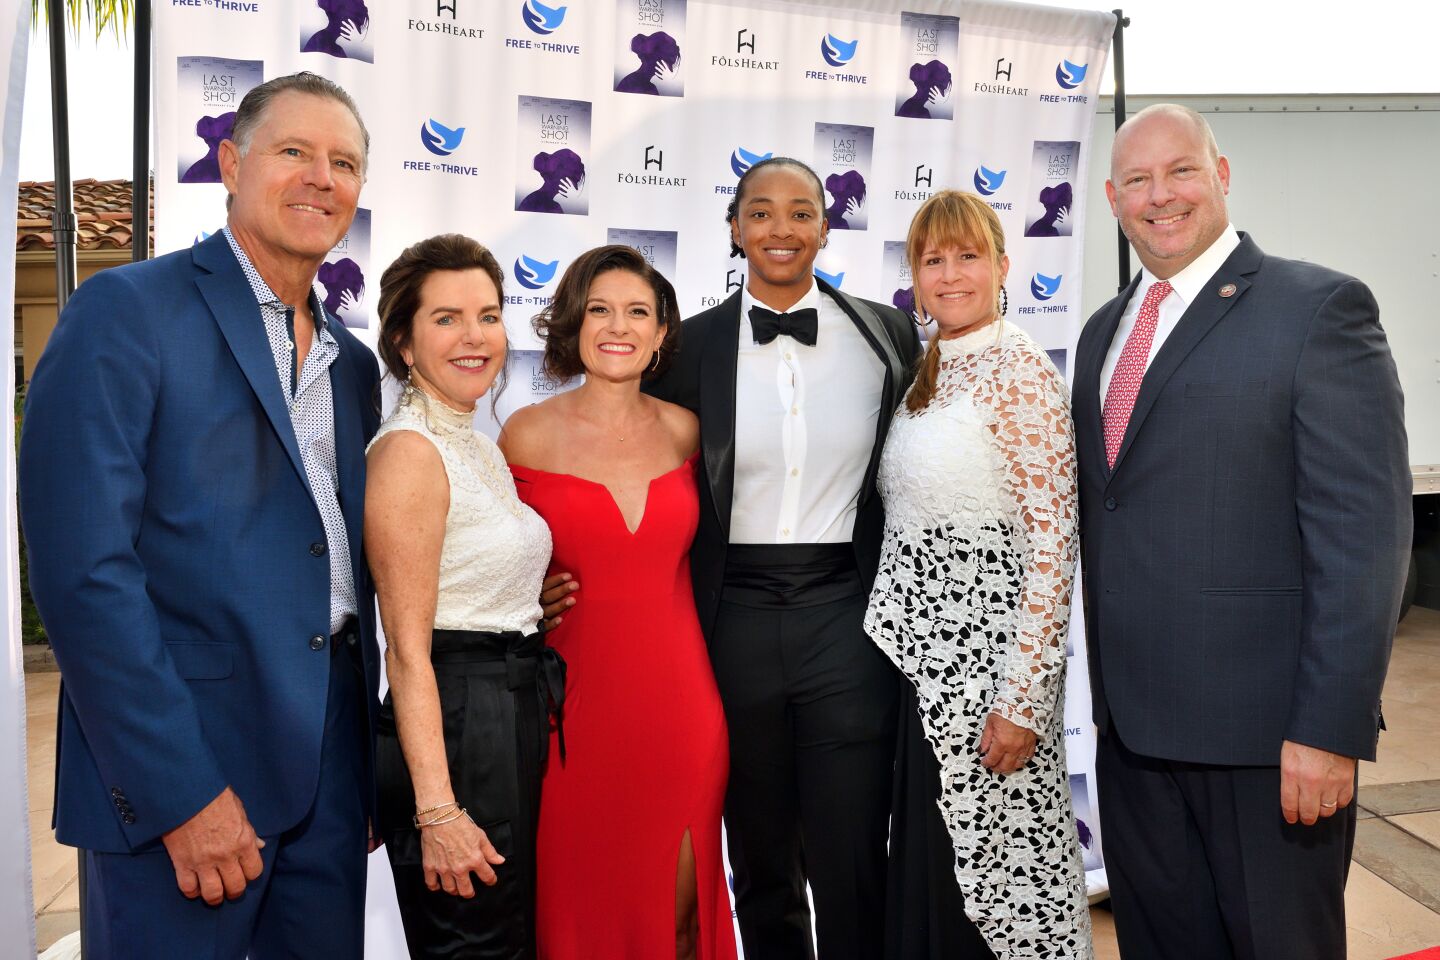 Event hosts Dan and Cynthia Kronemyer, Jamie Beck (FTT president and managing attorney) and Ali Buckner (director/producer of FTT's "Last Warning Shot" movie), Suzi and Adam Day (Suzi is FTT director of development and survivor empowerment)